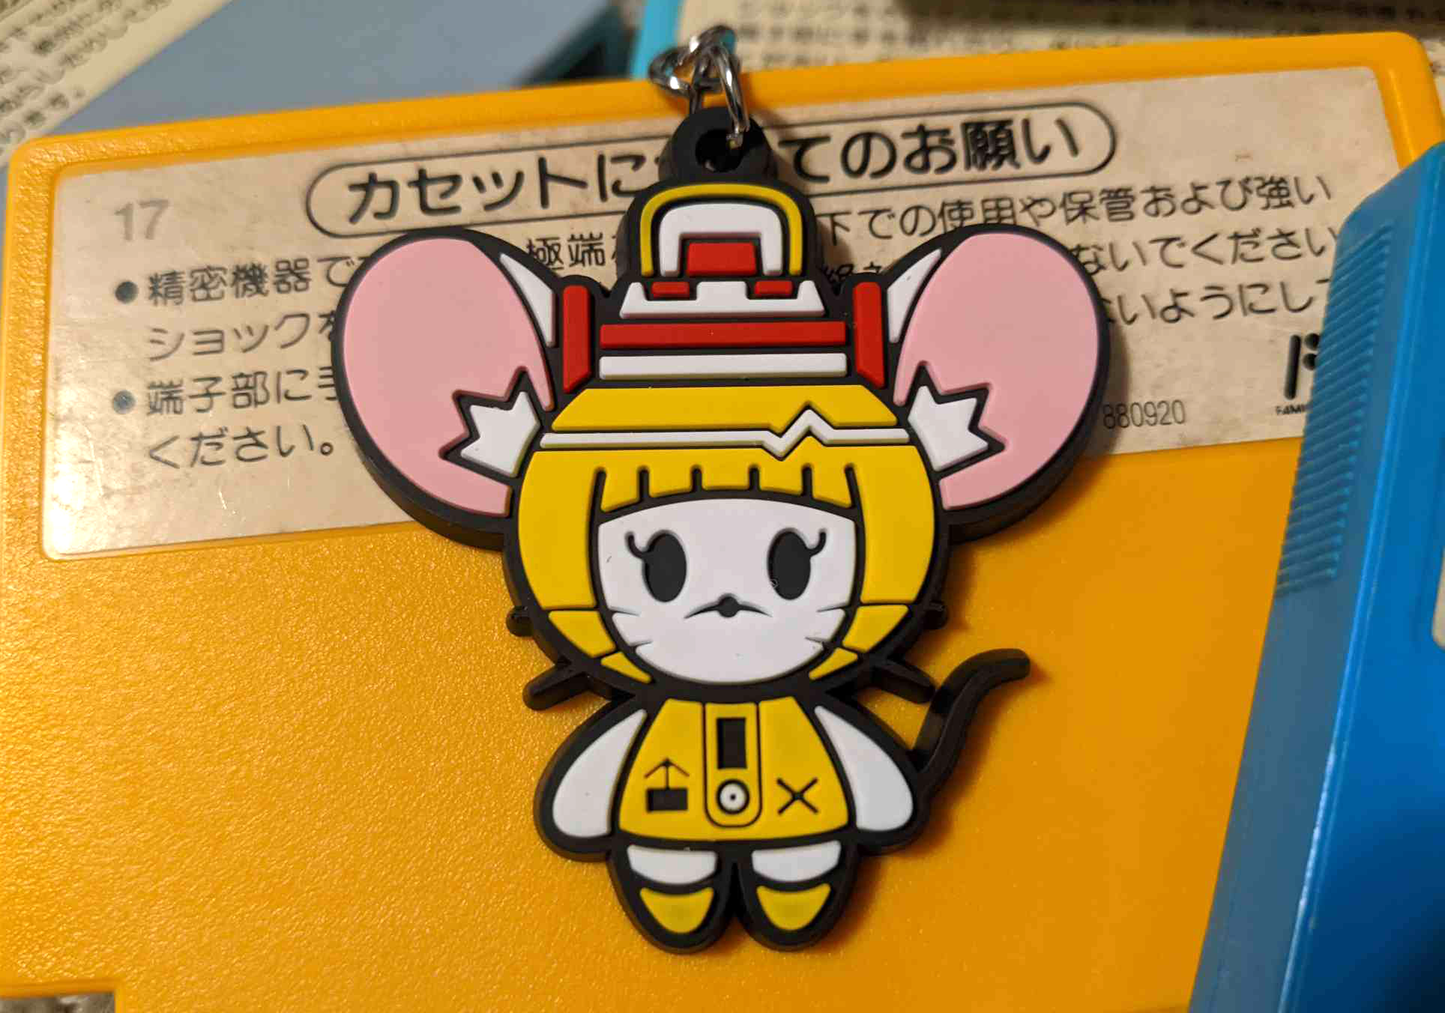 Famimouse Rubber Keychain